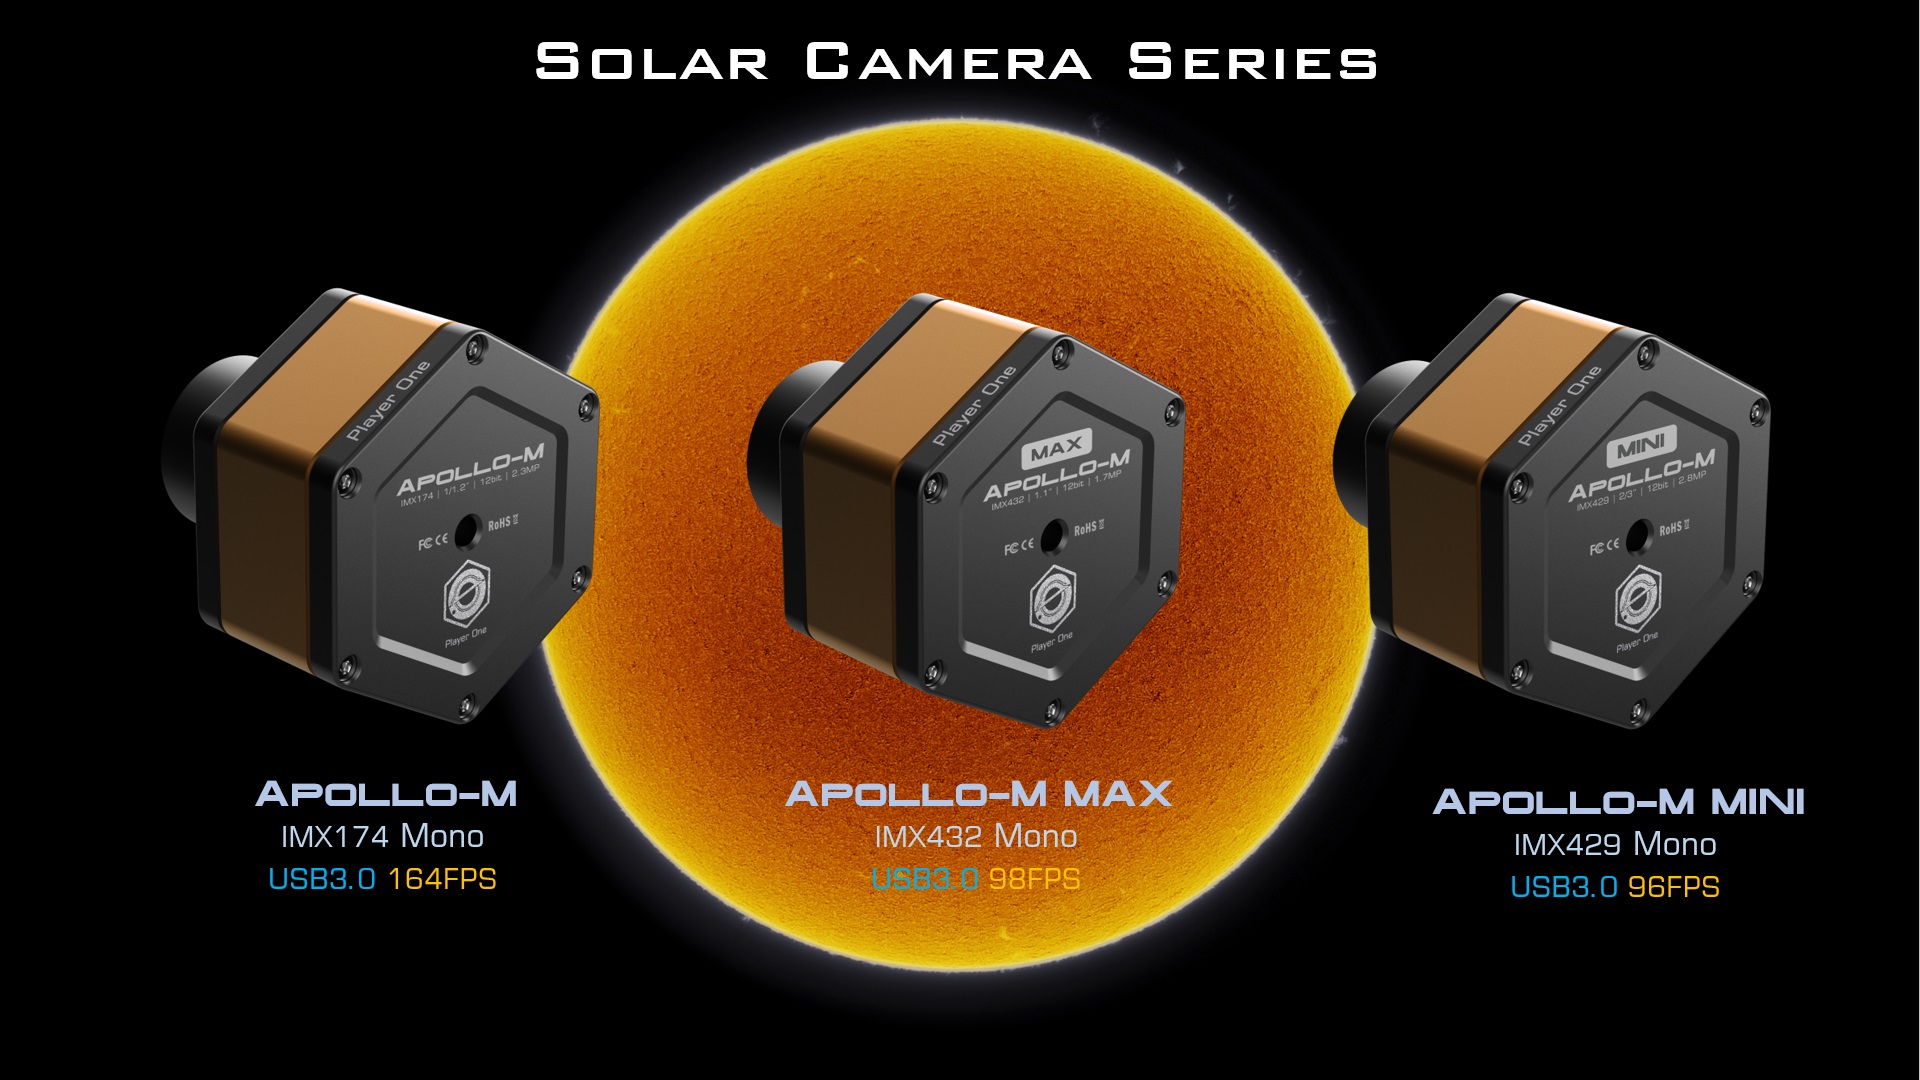 Focus on Solar imaging: Solar camera series released today!